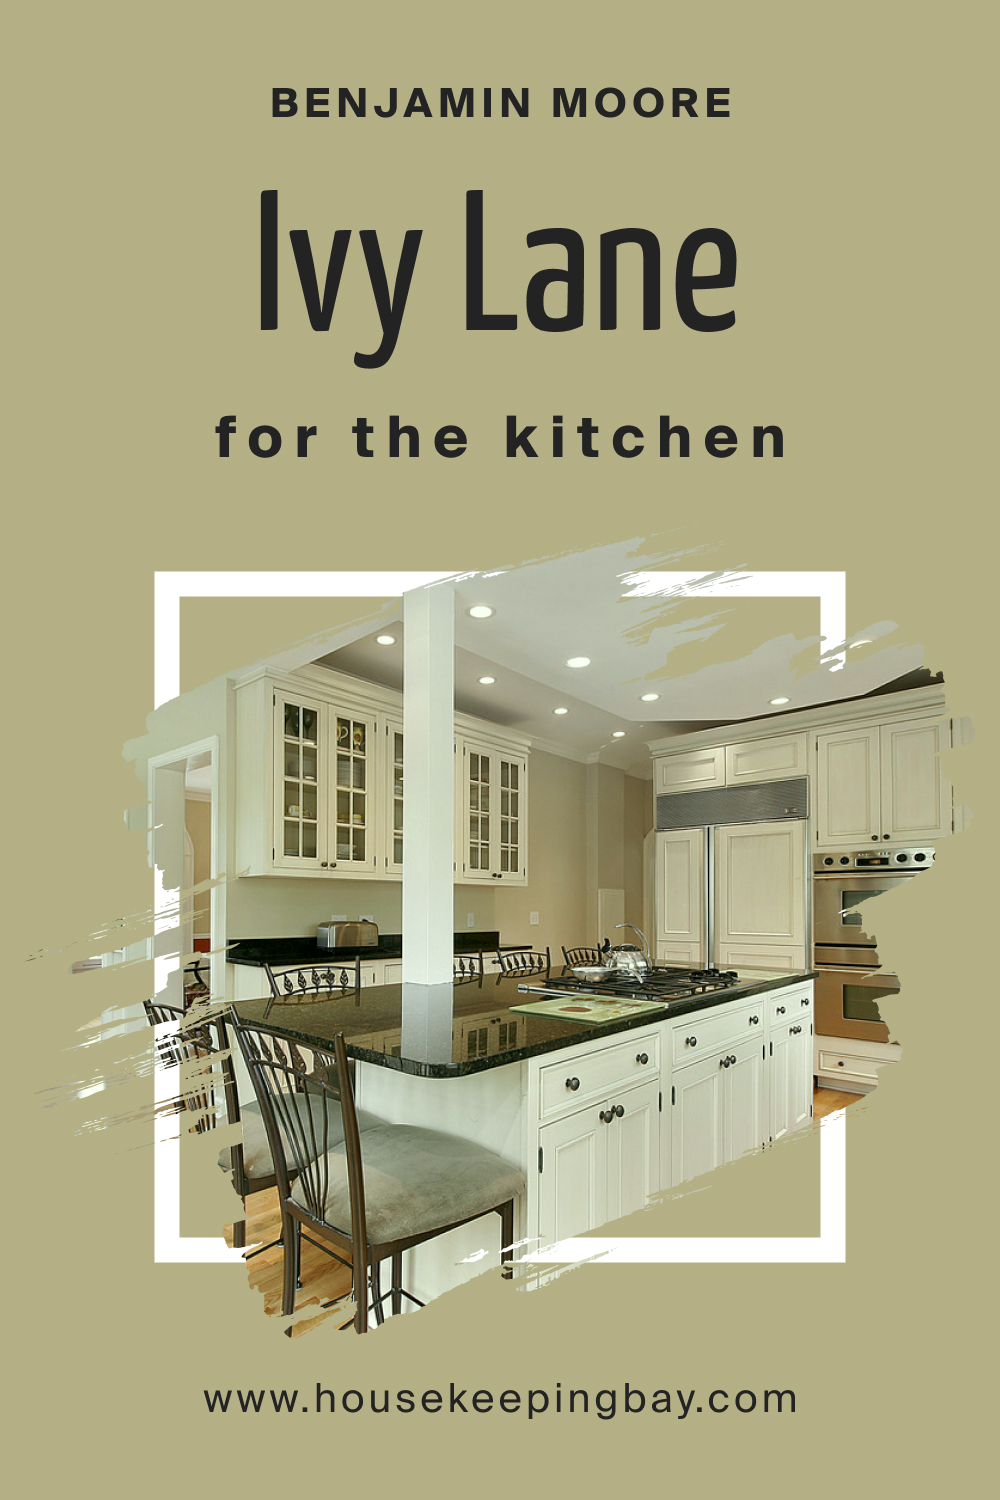 How to Use BM Ivy Lane 523 in the Kitchen?